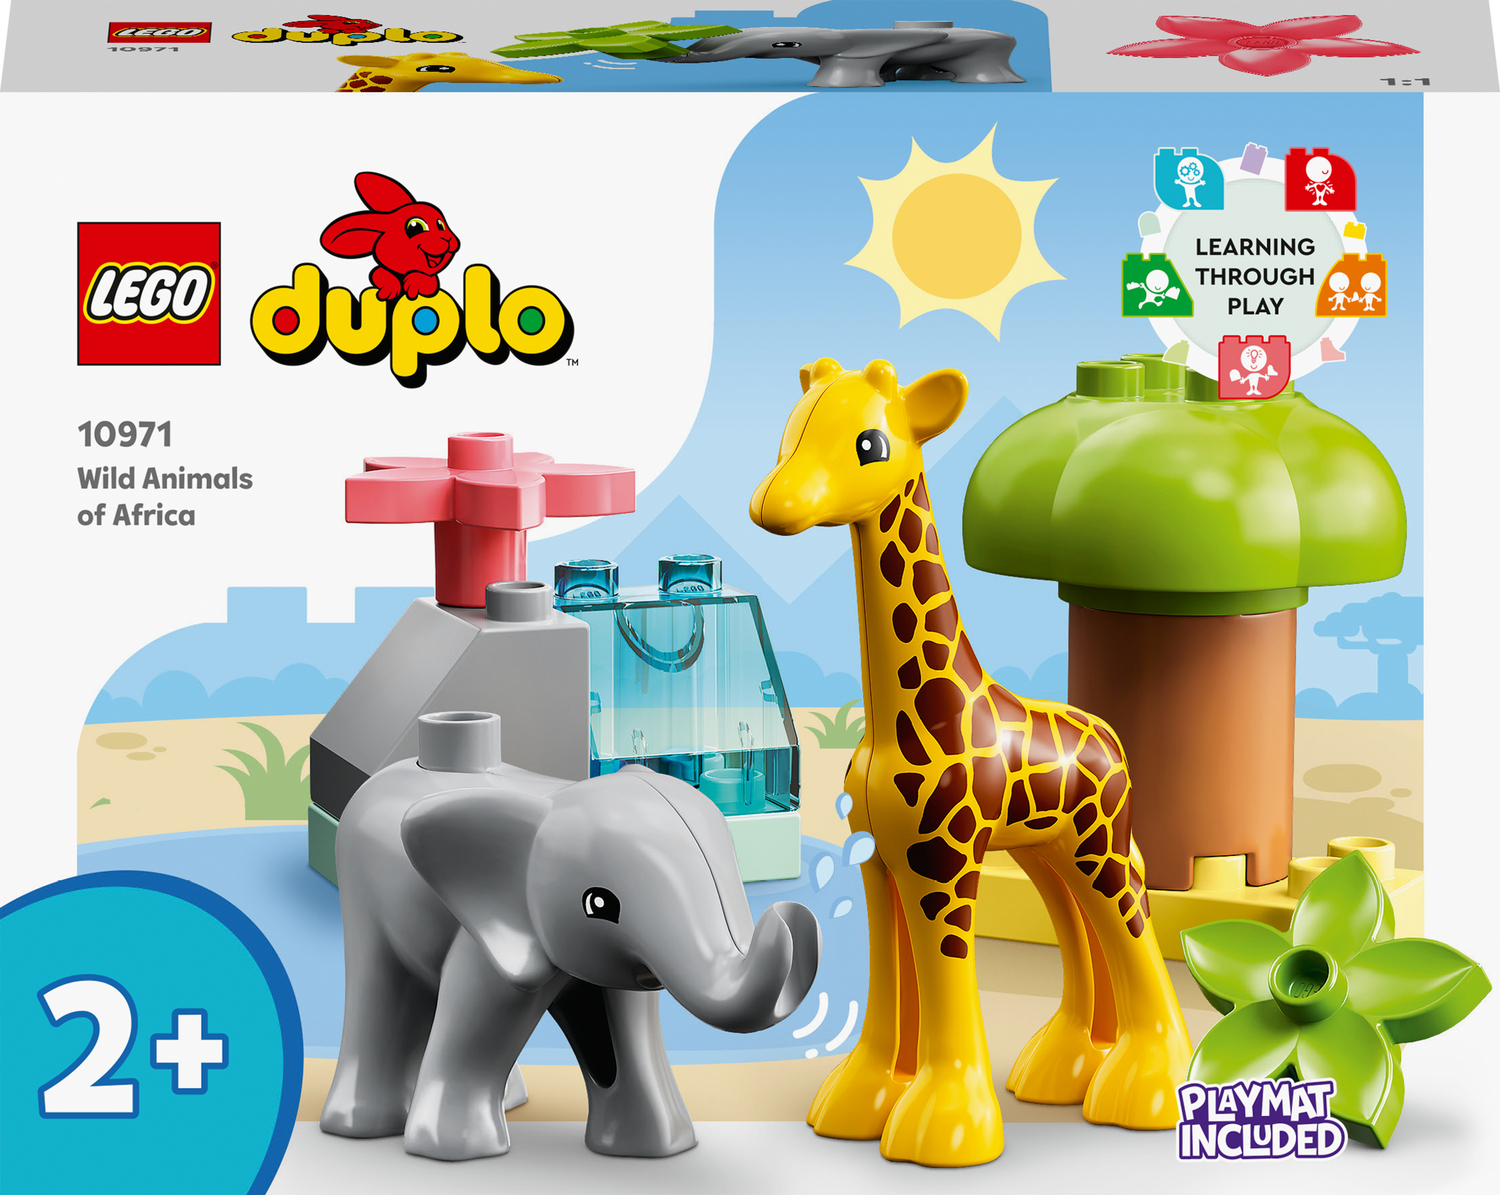 Lego Duplo 10971 Wild Animals of Africa - Teaching Toys and Books